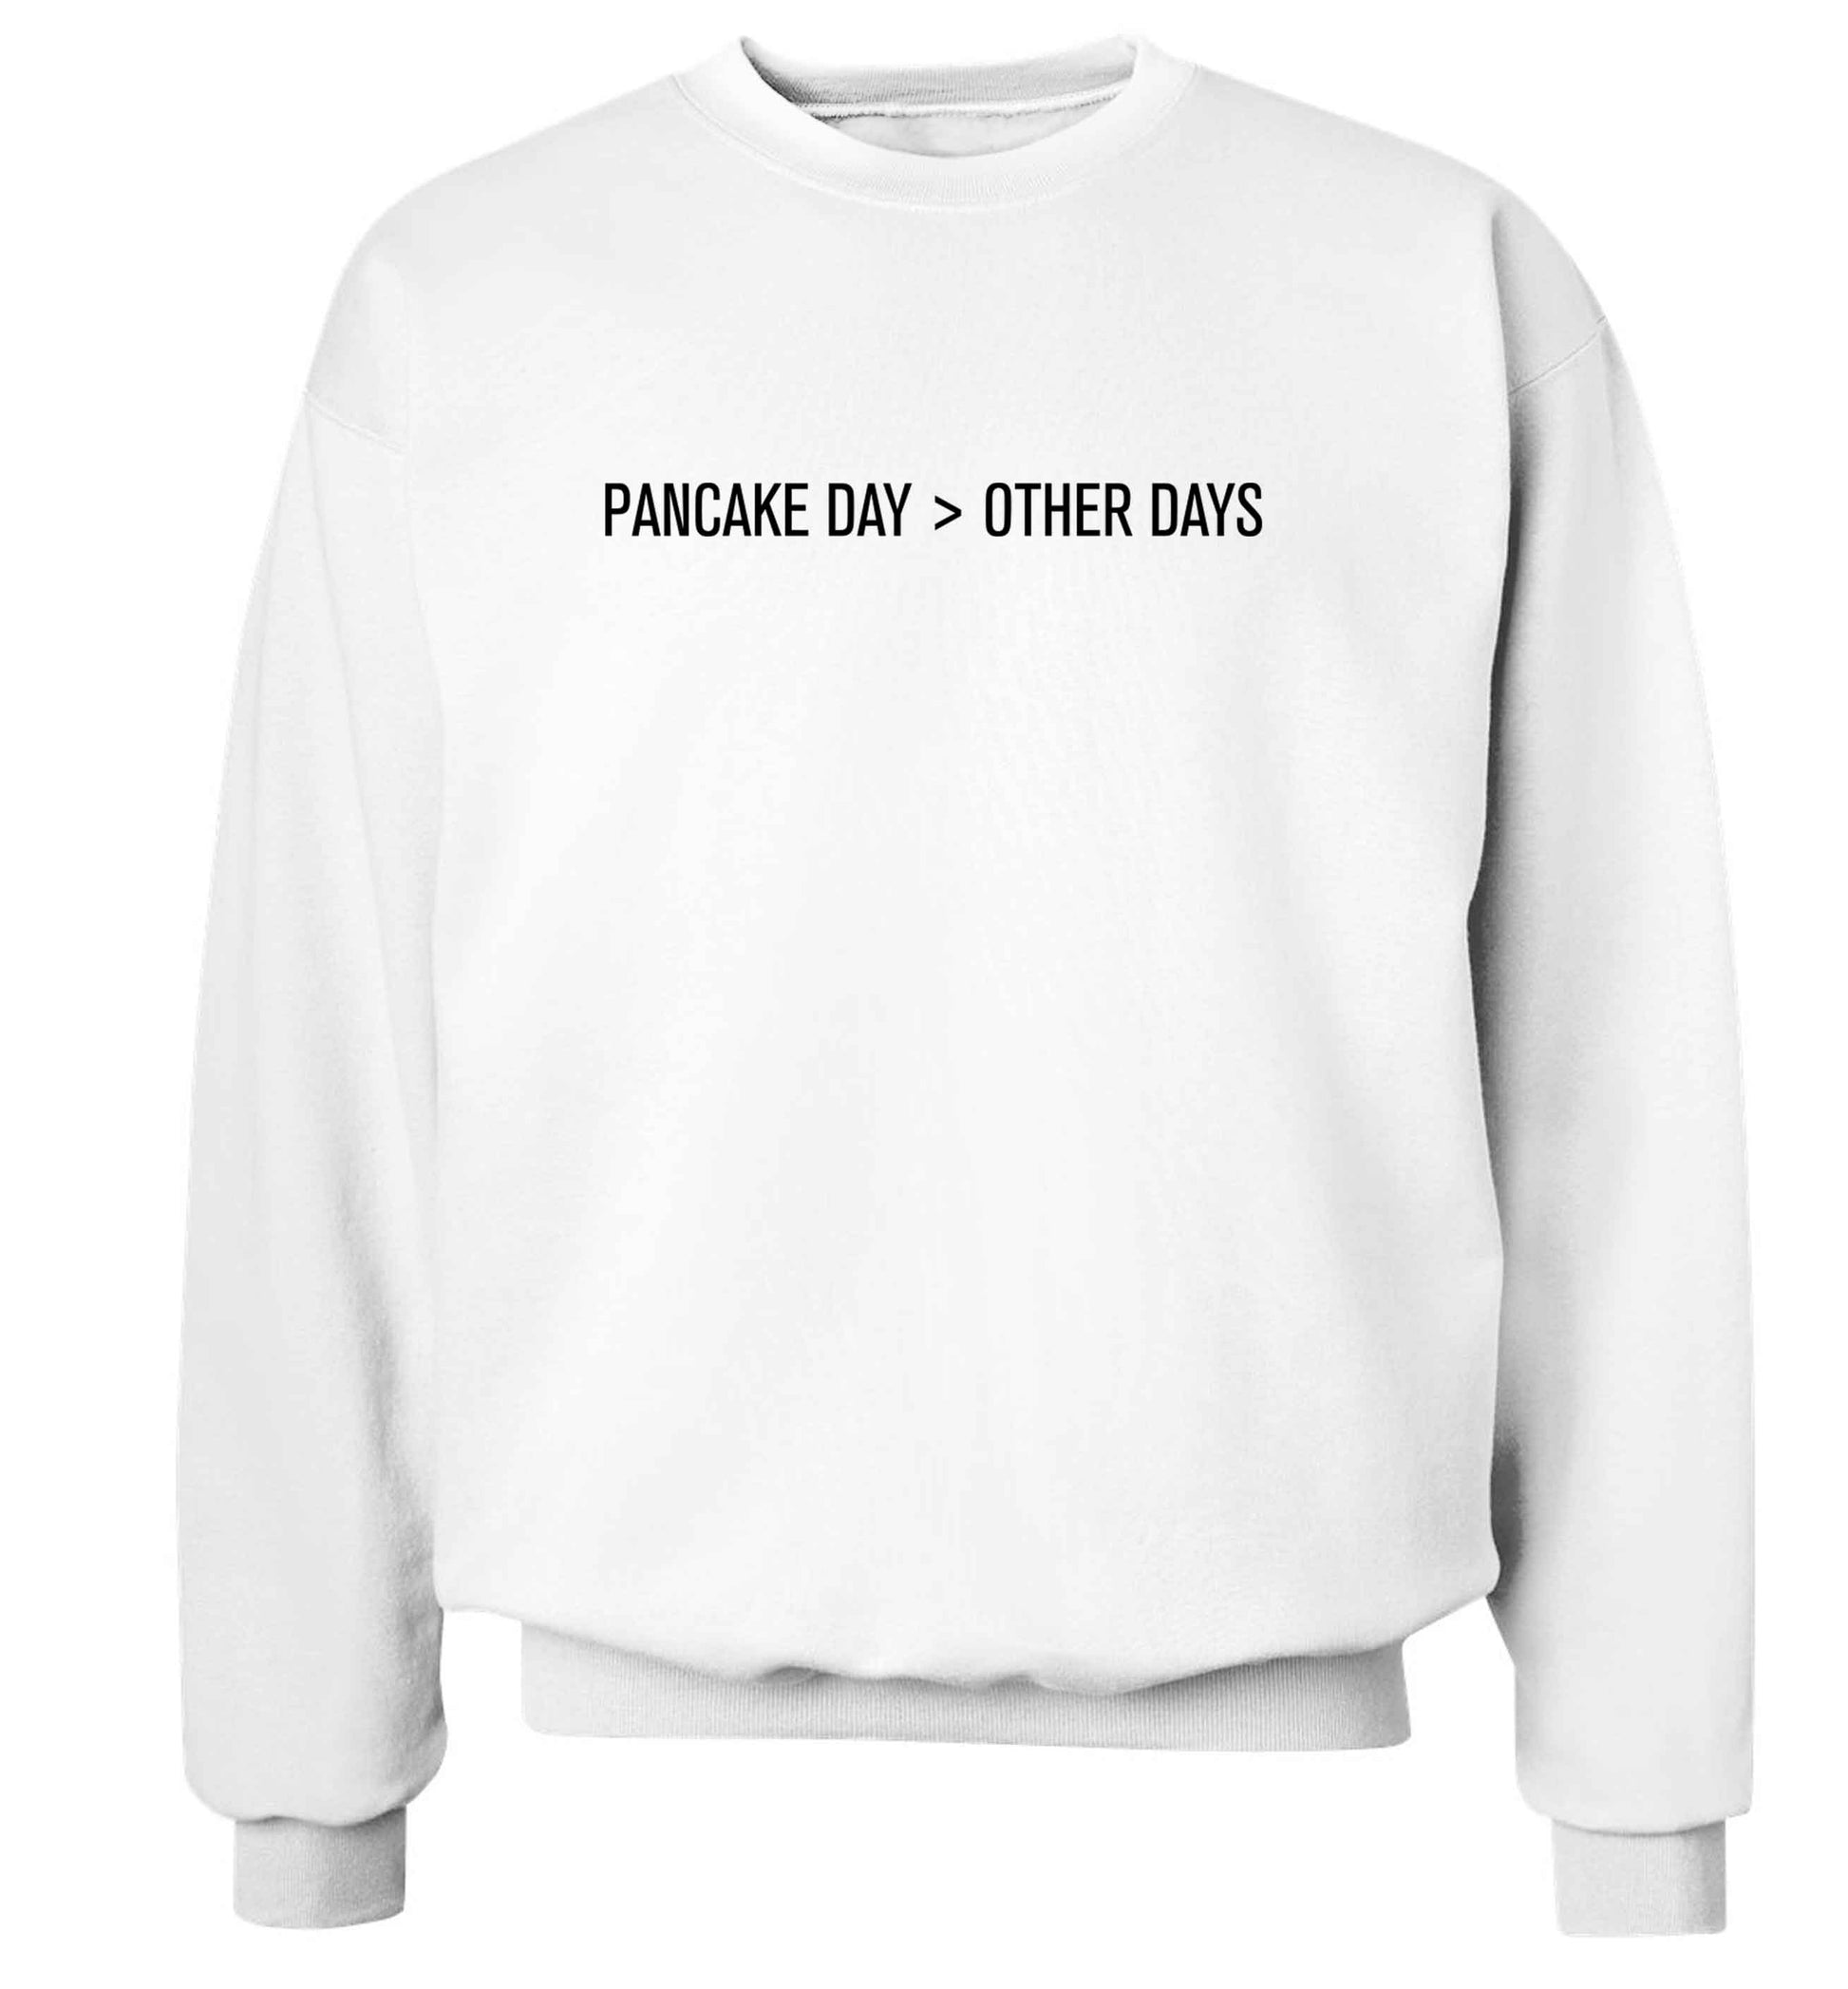 Pancake day > other days adult's unisex white sweater 2XL